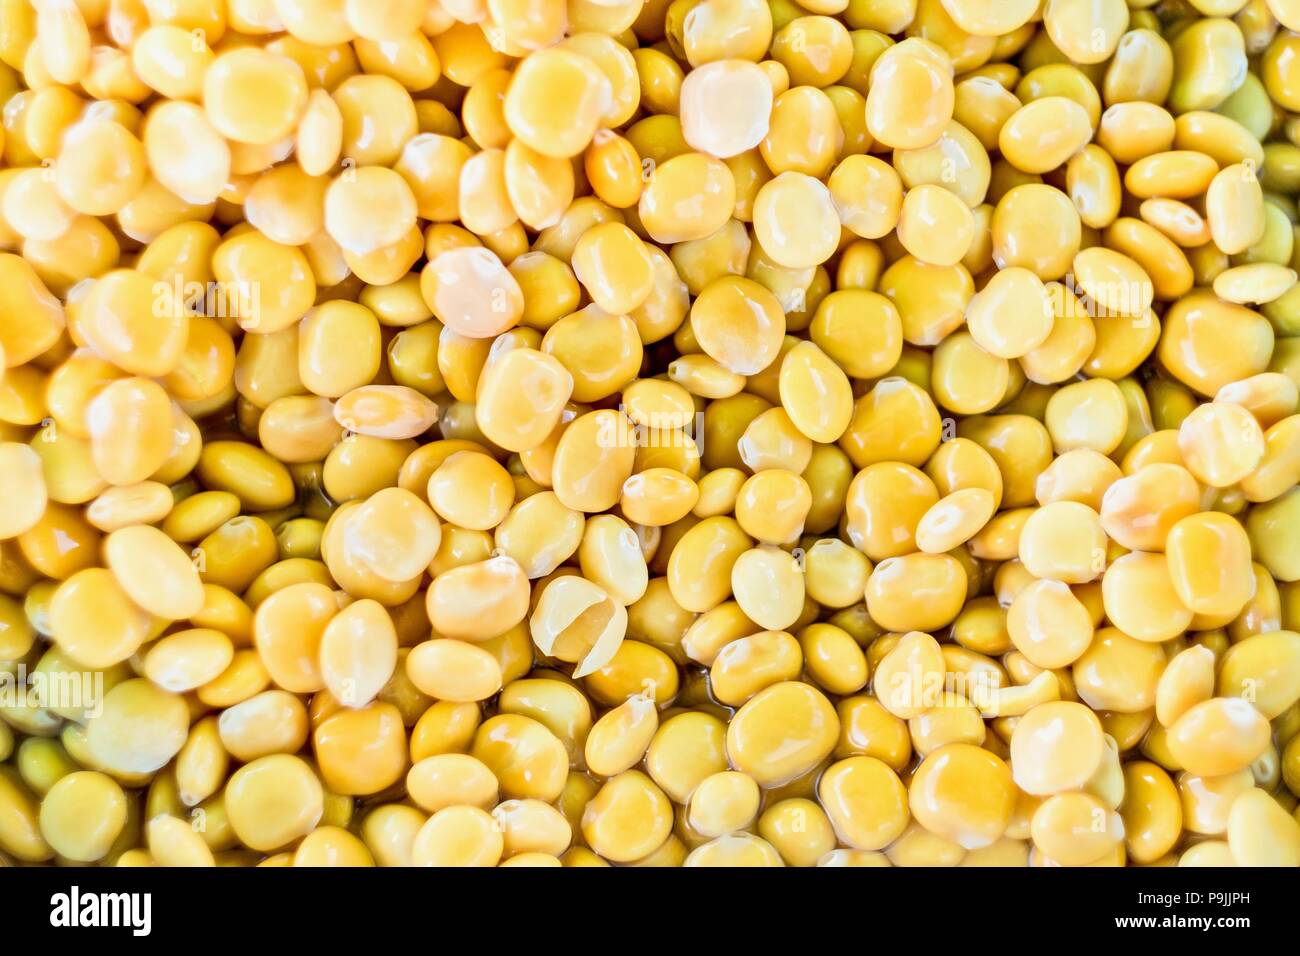 Lupin beans in salted water, background image Stock Photo